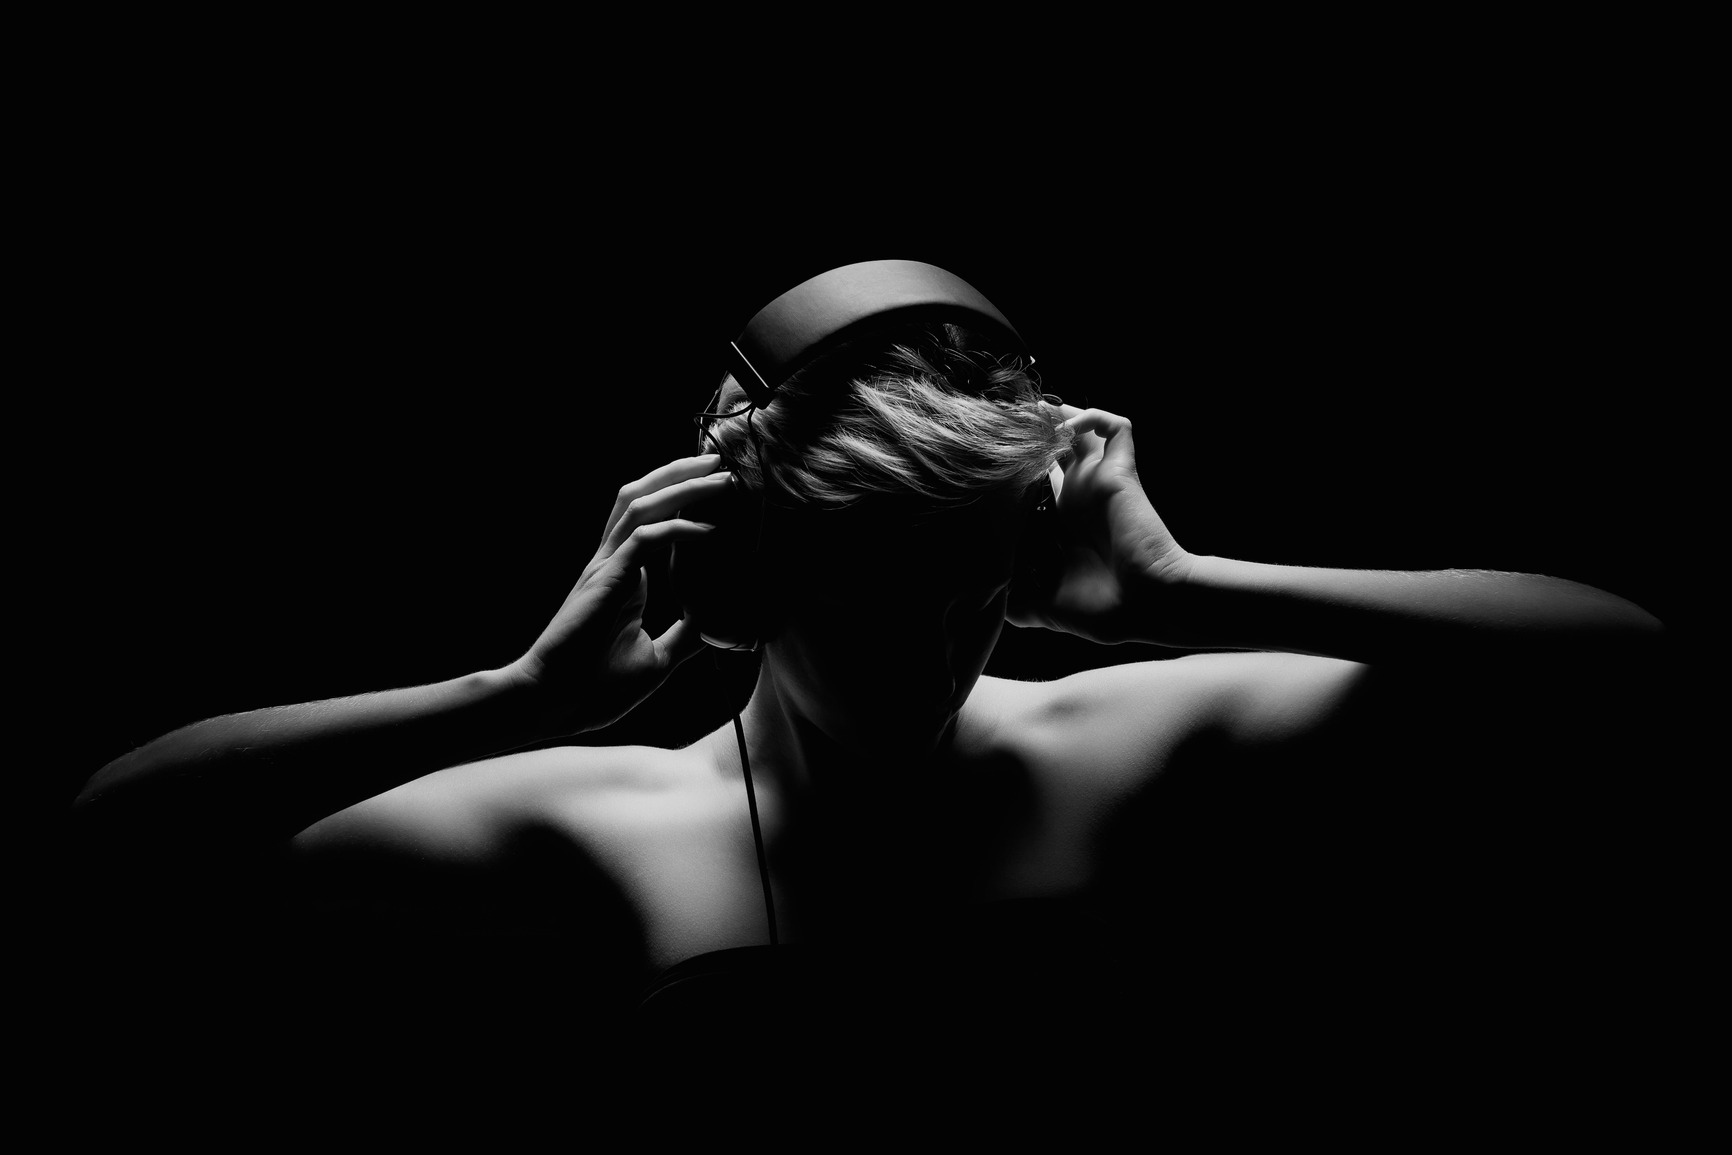 blonde woman listening to music in black and white tense light